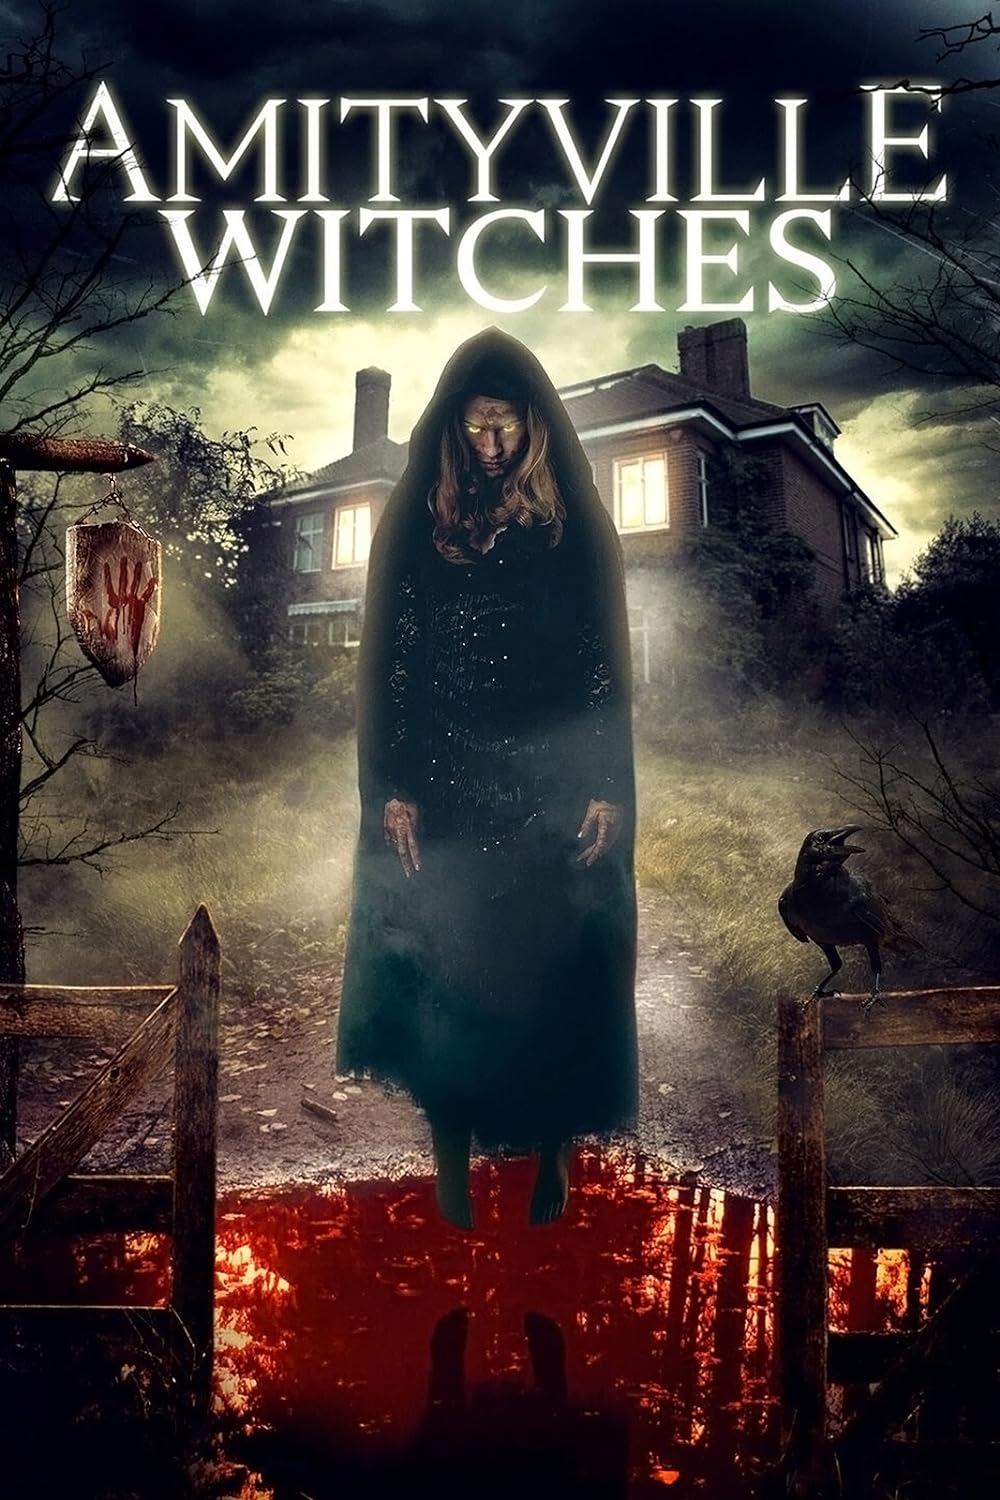 Witches of Amityville Academy (2020) 1080p-720p-480p HDRip Hollywood Movie ORG. [Dual Audio] [Hindi or English] x264 ESubs